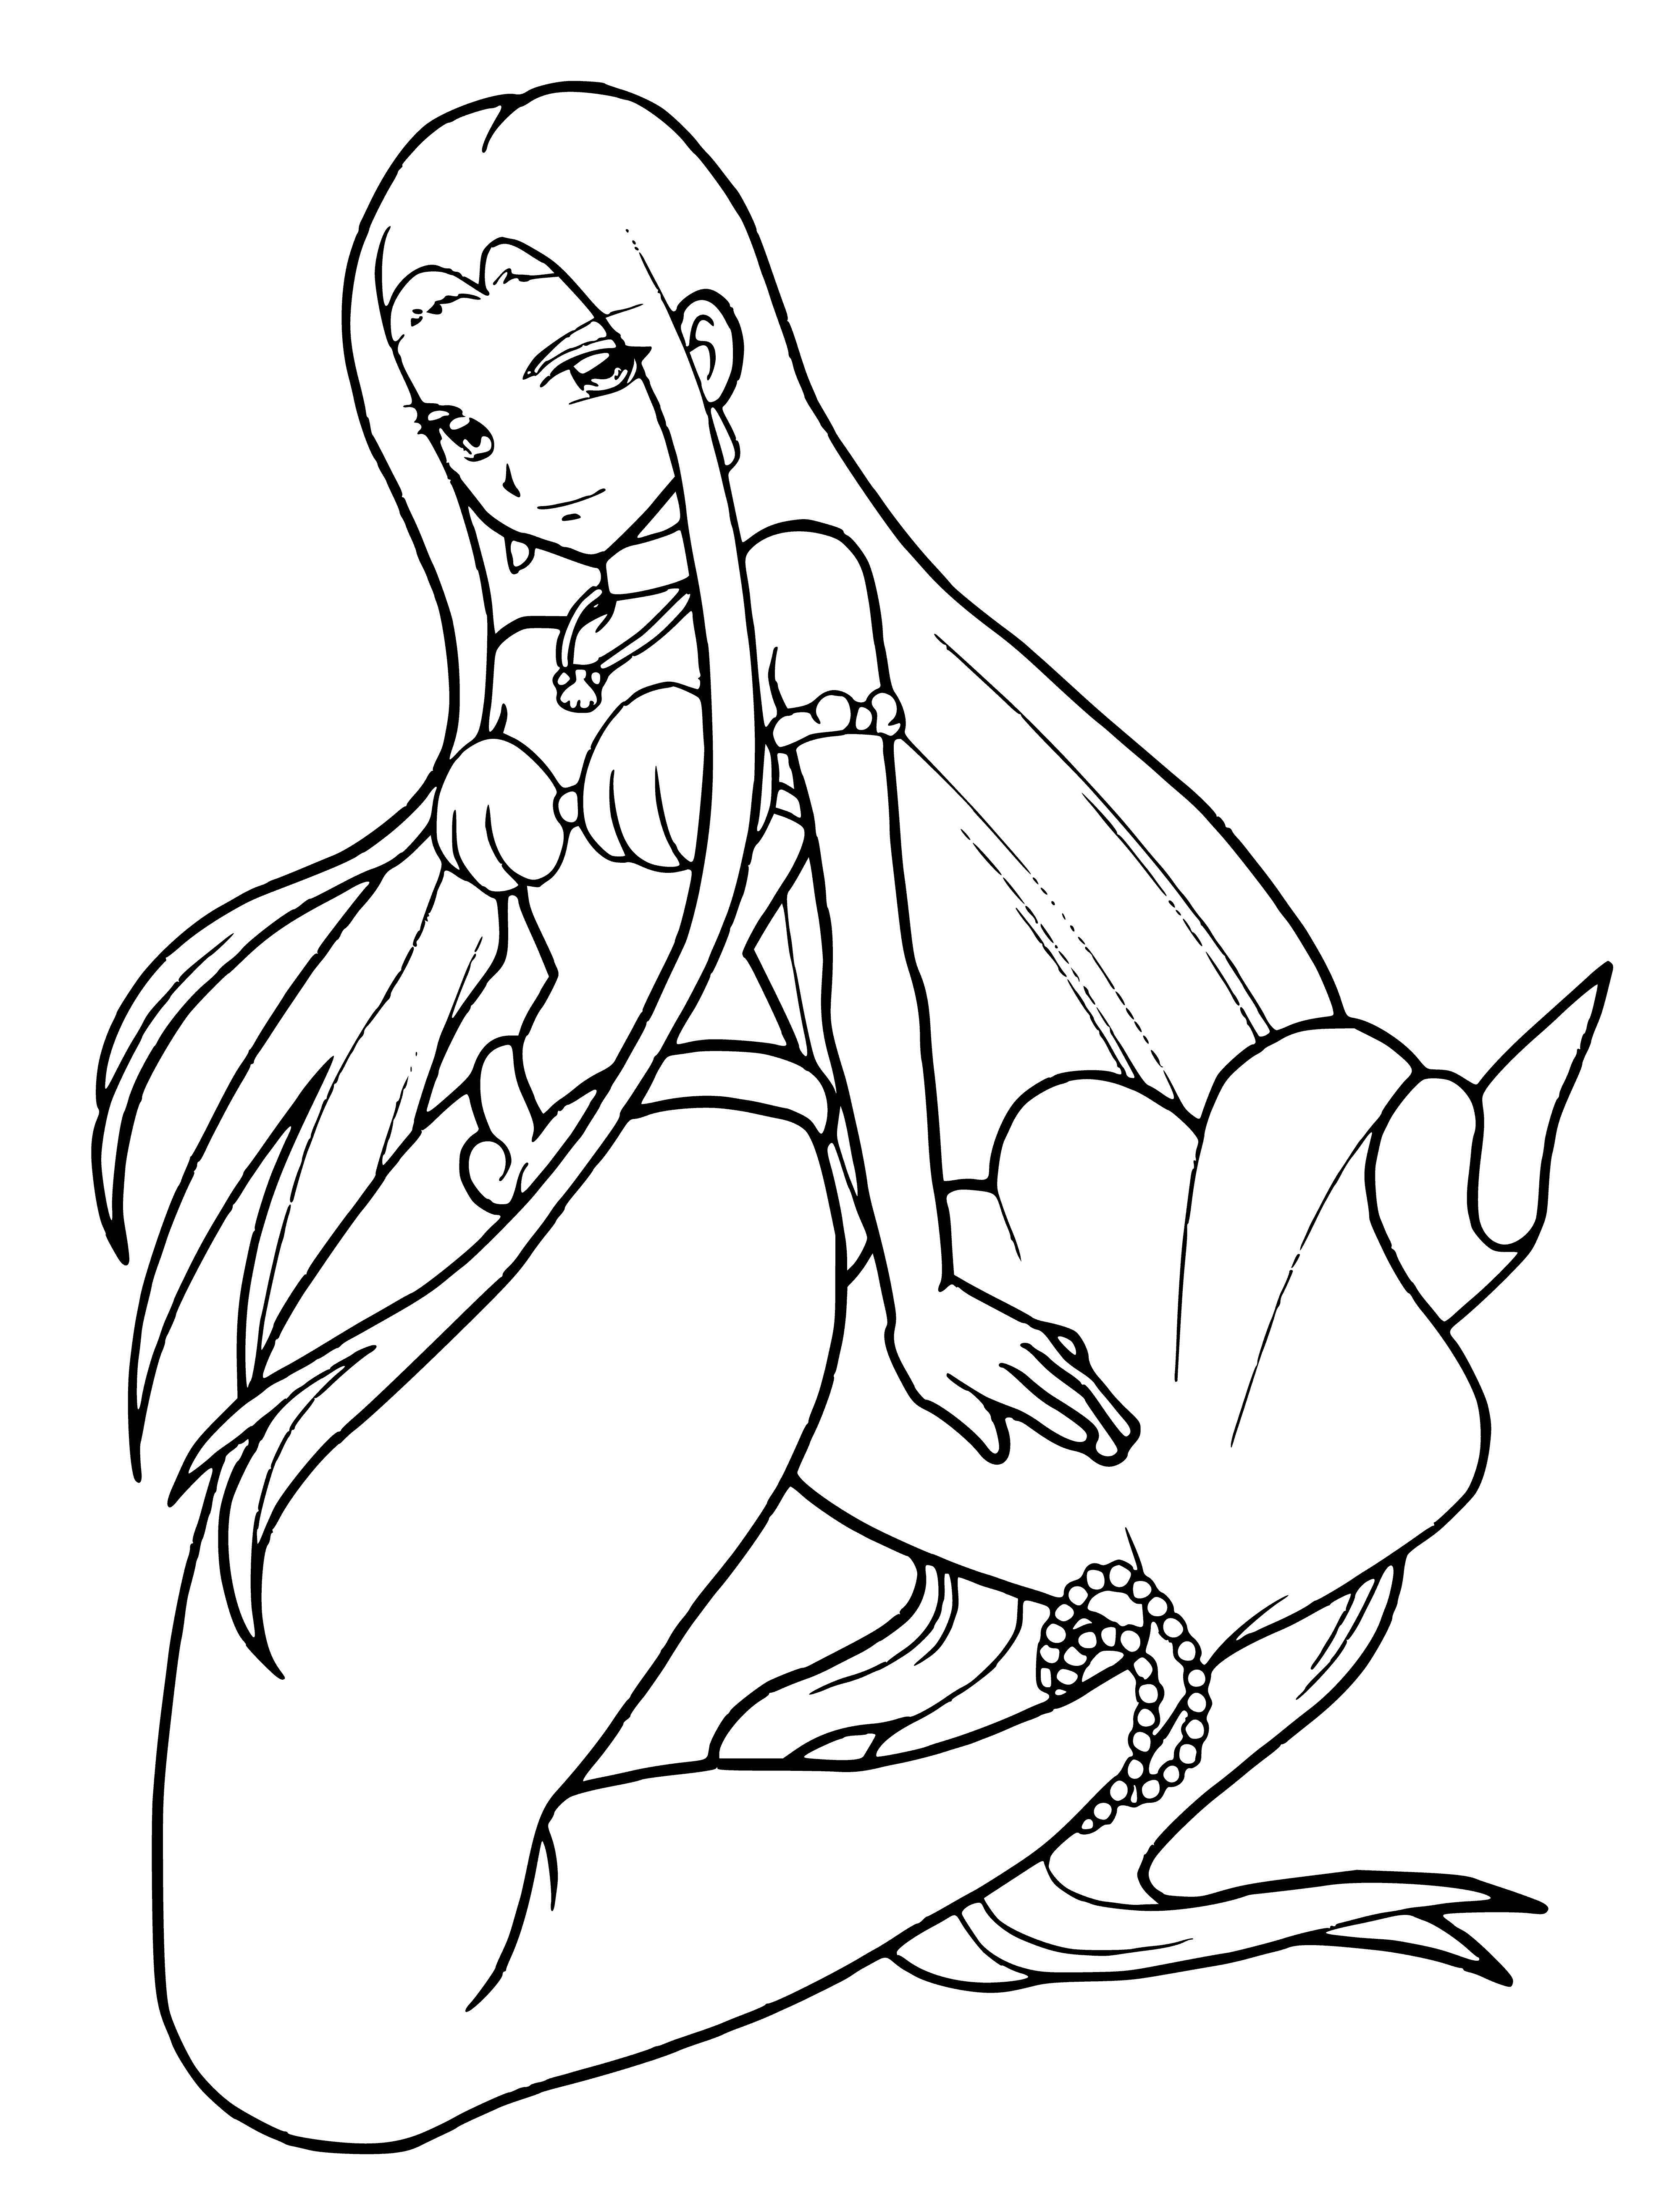 coloring page: Mermaids with female upper body and fishtail sit in a lagoon, combing their hair and singing. Ship in background sailing the ocean.